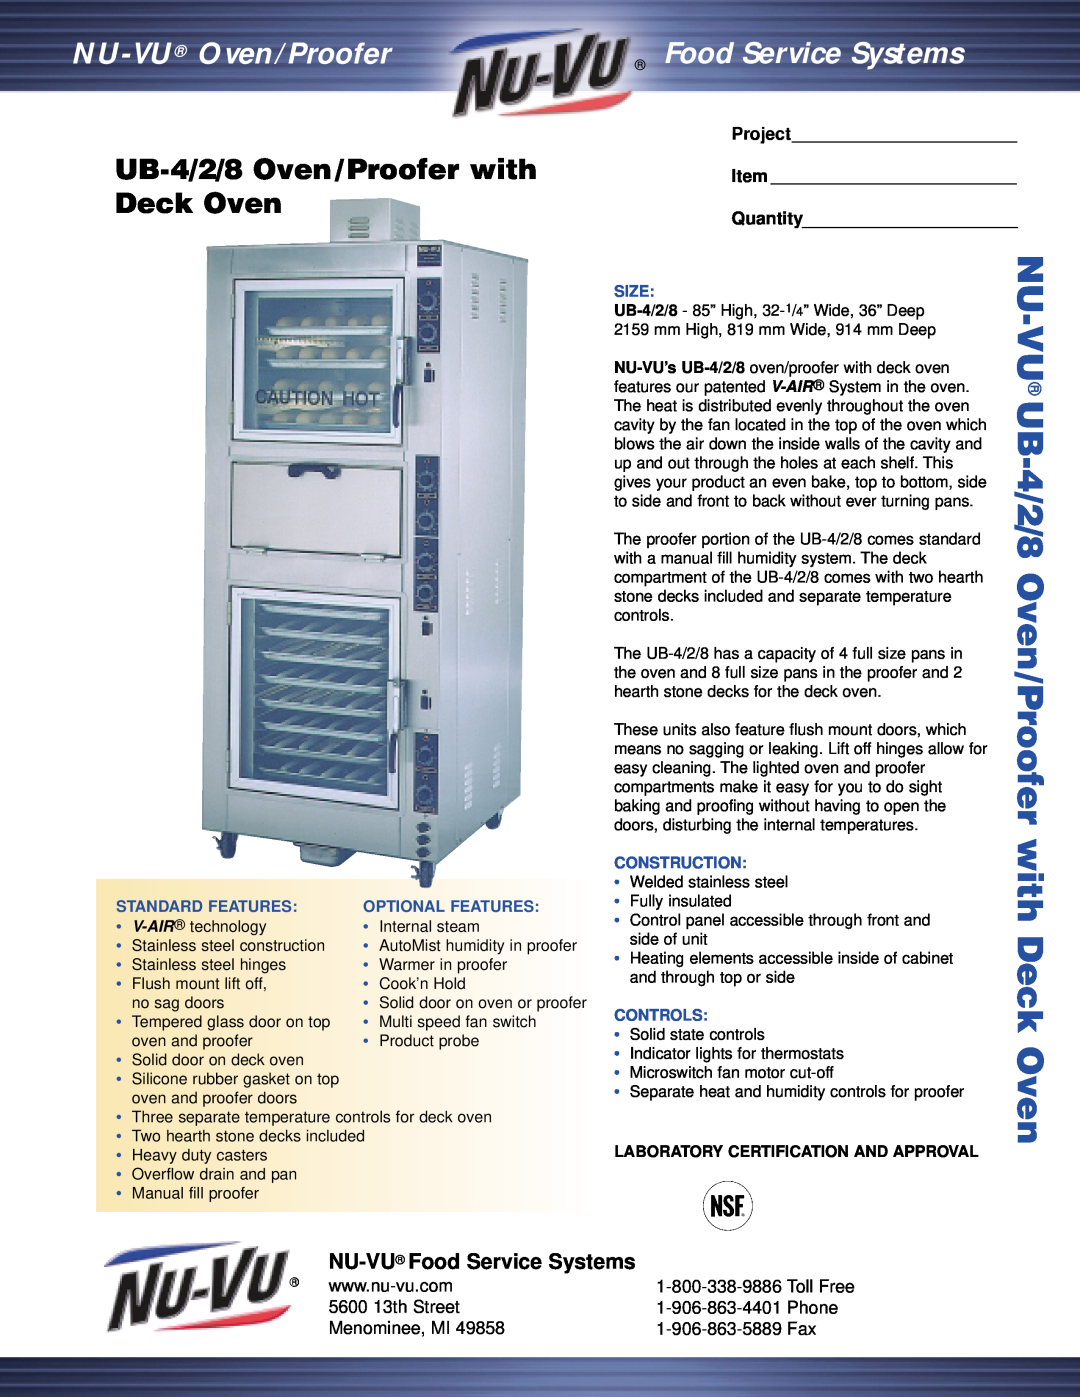 Middleby Cooking Systems Group manual UB-4/2/8Oven/Proofer with Deck Oven, NU-VU Food Service Systems, 5600 13th Street 